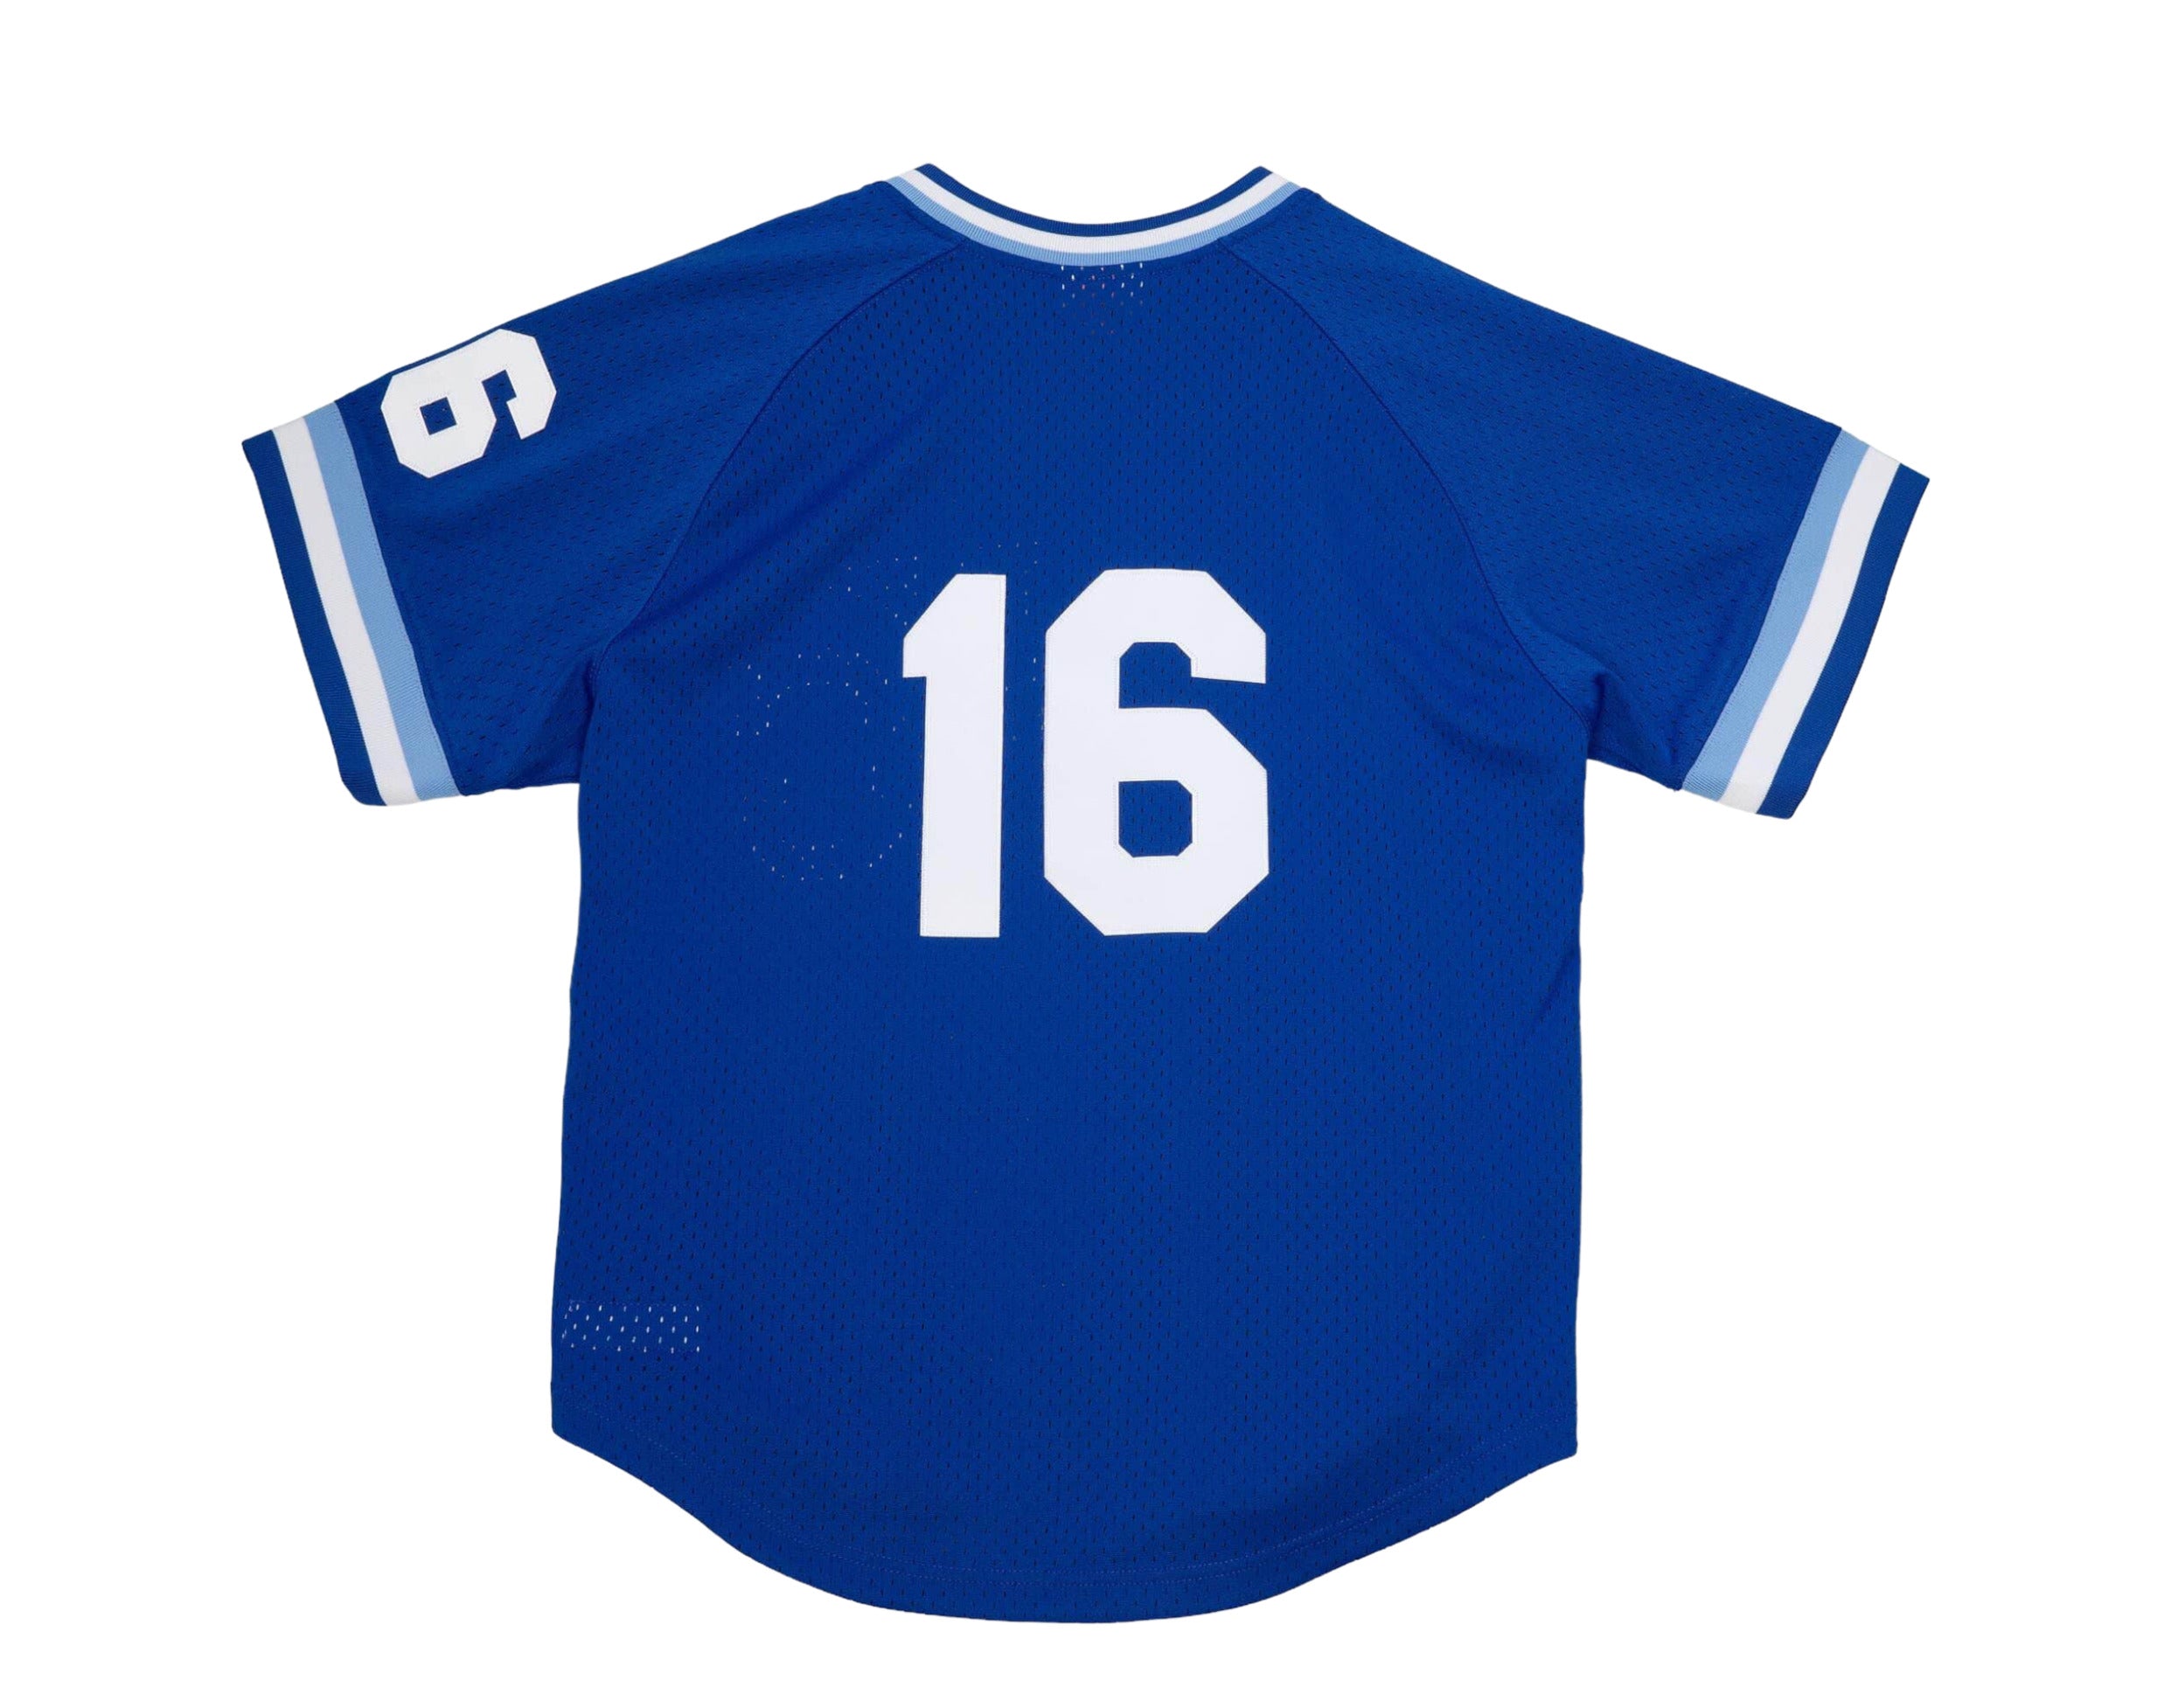 Men’s Kansas City Royals Bo Jackson Mitchell & Ness Royal 1989 Authentic Cooperstown Collection Batting Mesh Practice Jersey - S